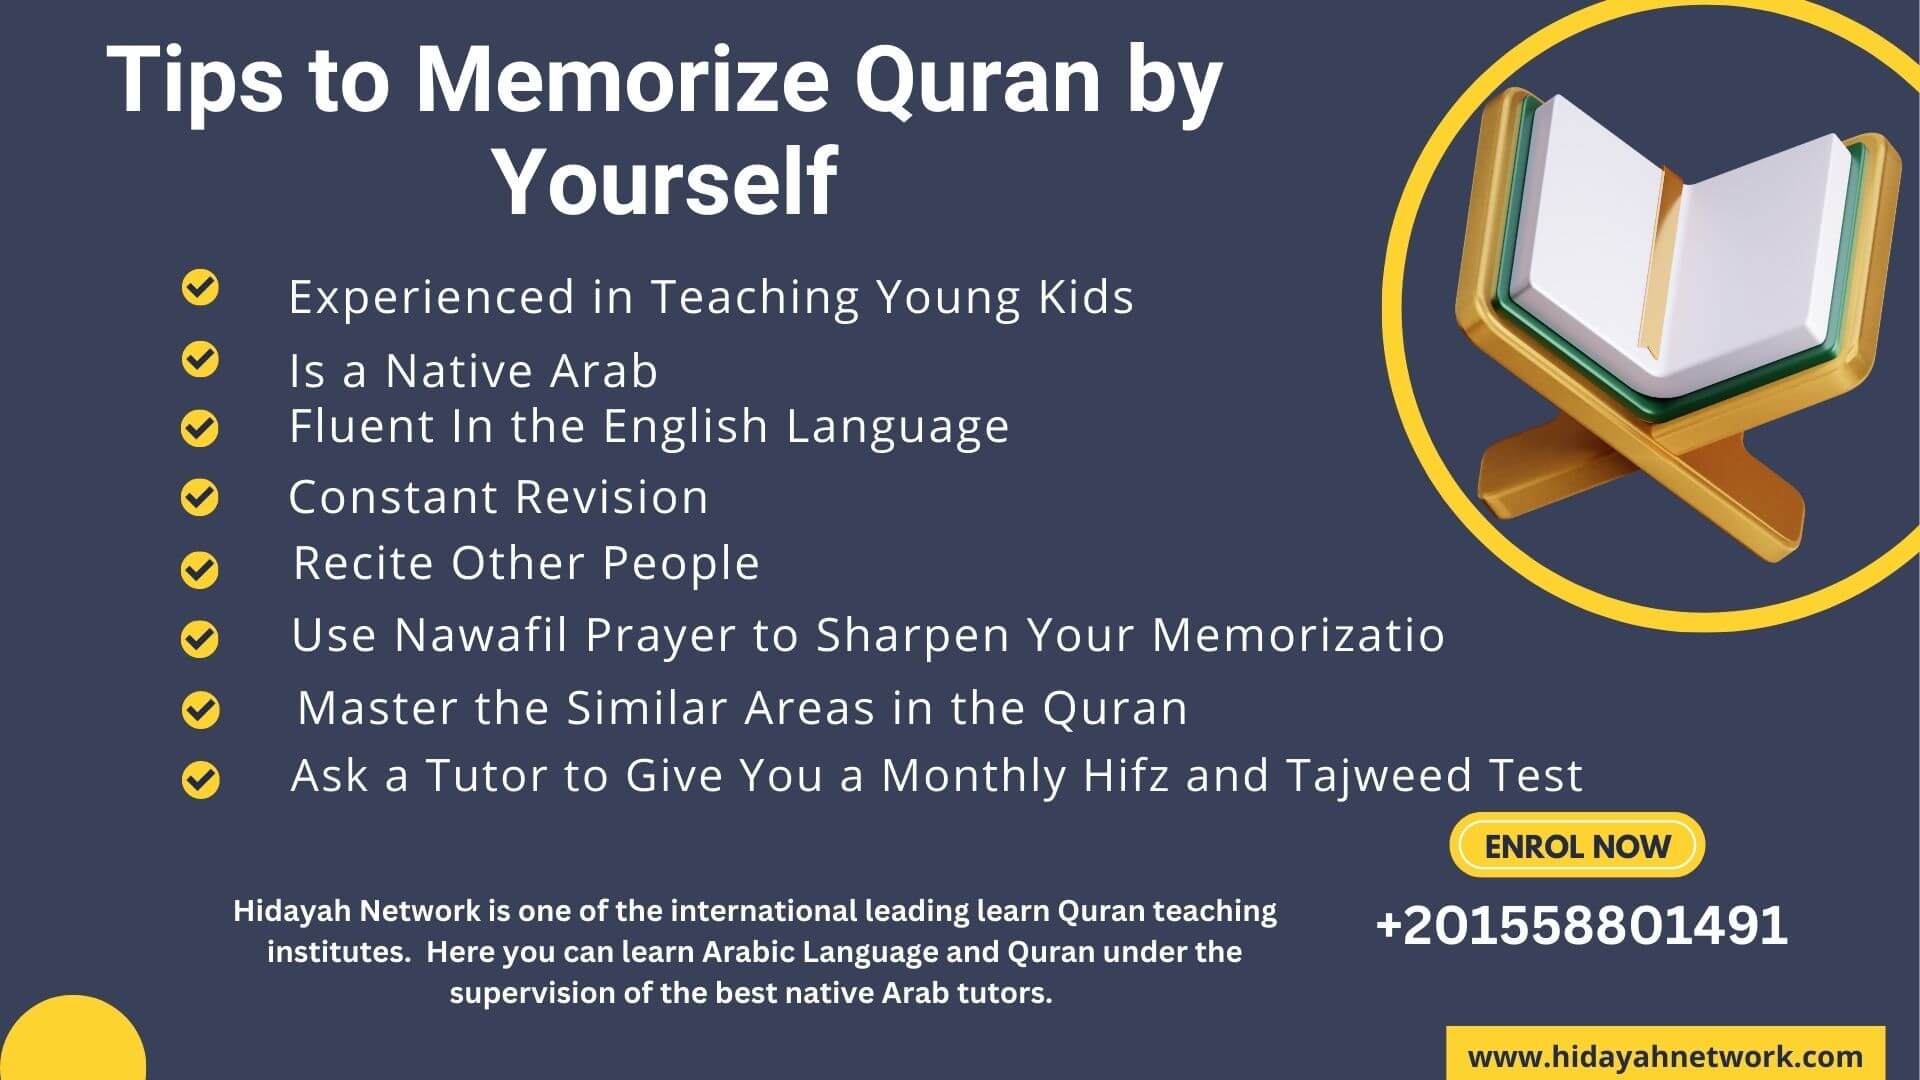 Tips to Memorize Quran by Yourself